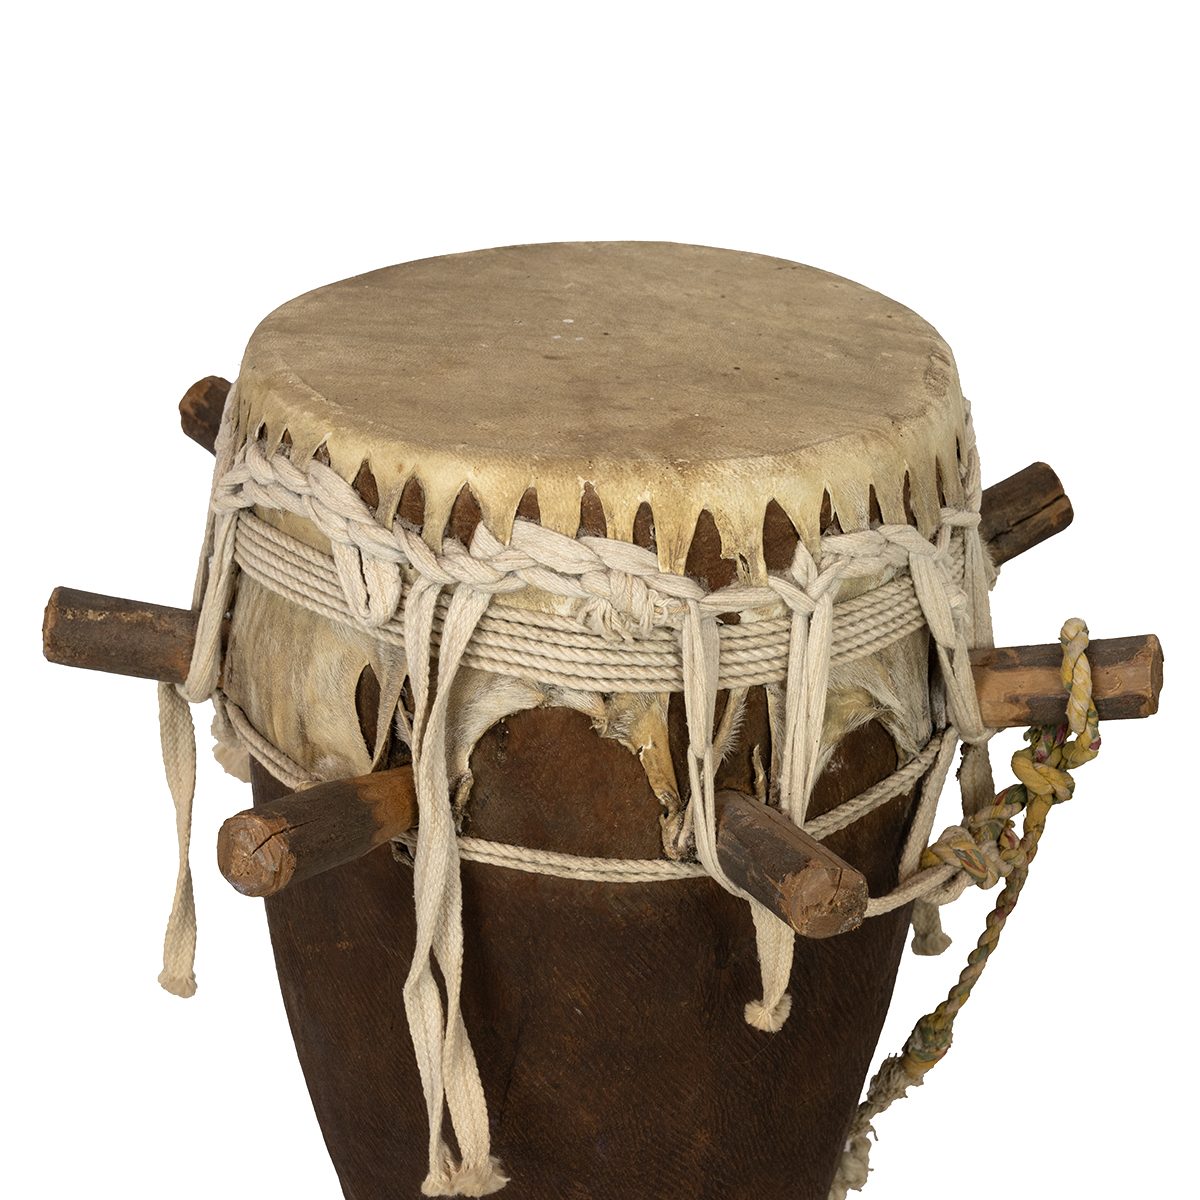 Traditional African hardwood drum (H 52cm) and a hardwood mortar for pound grain or roots (H 41cm... - Image 2 of 3